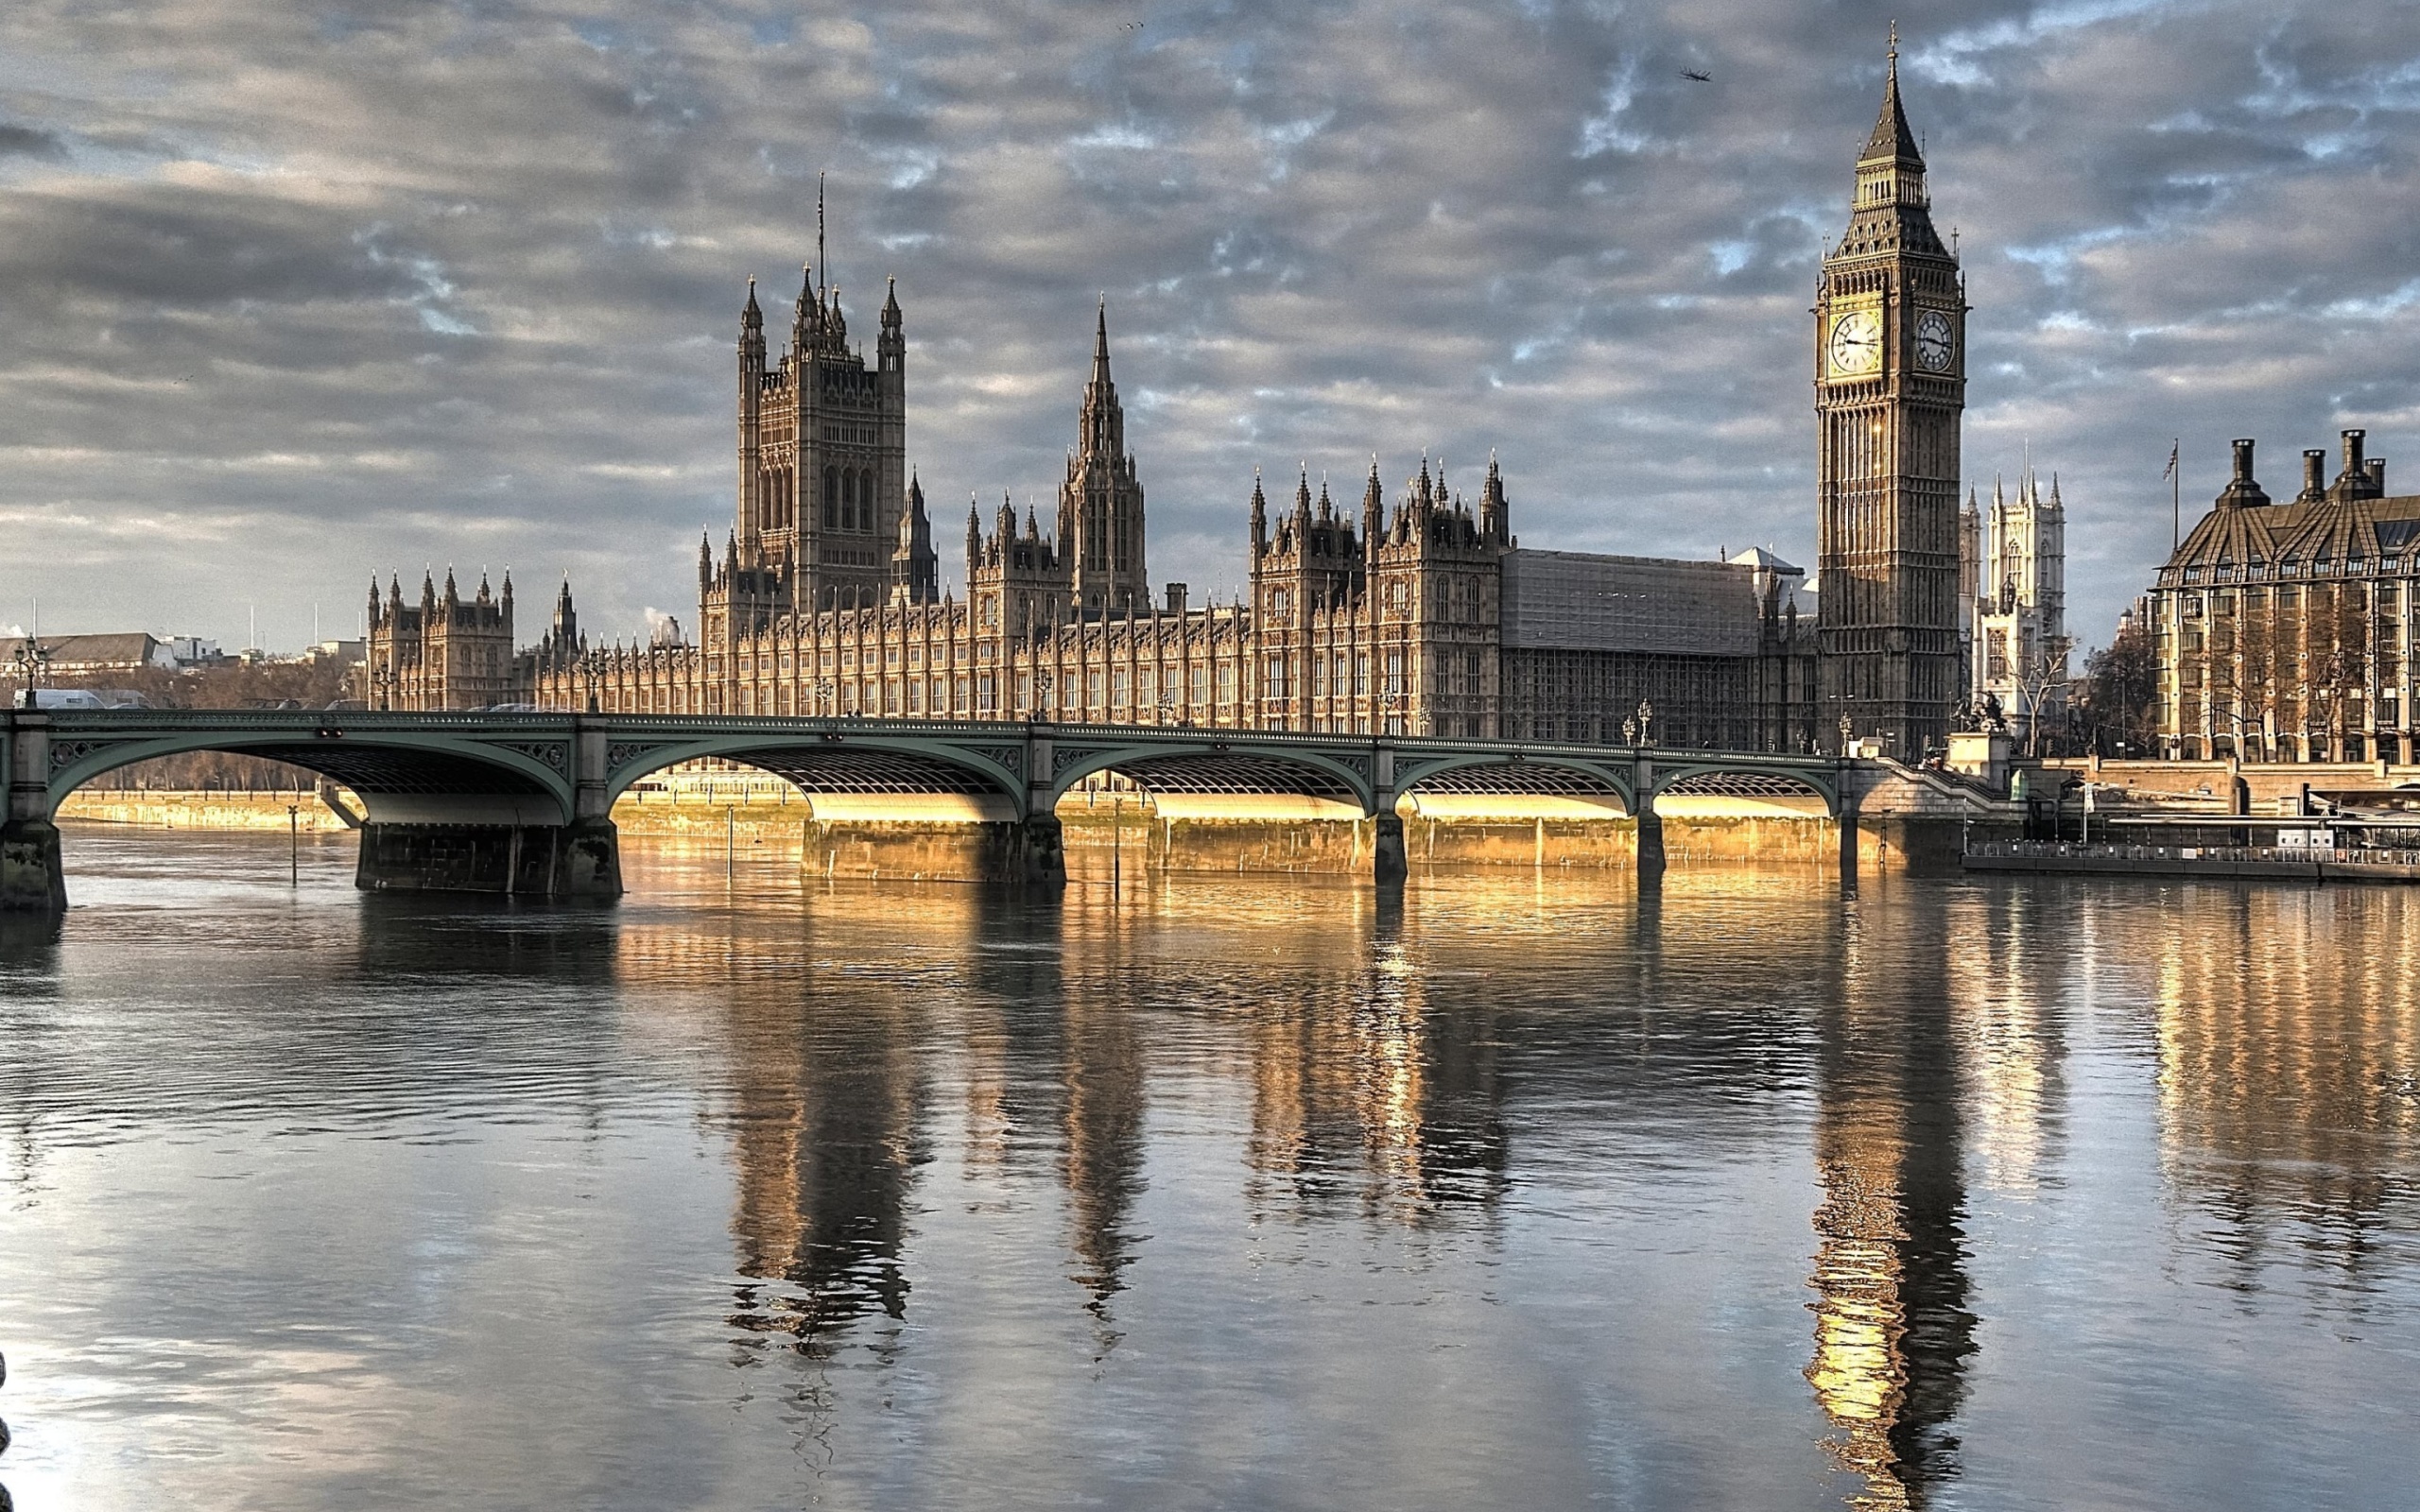 Das Palace of Westminster in London Wallpaper 2560x1600